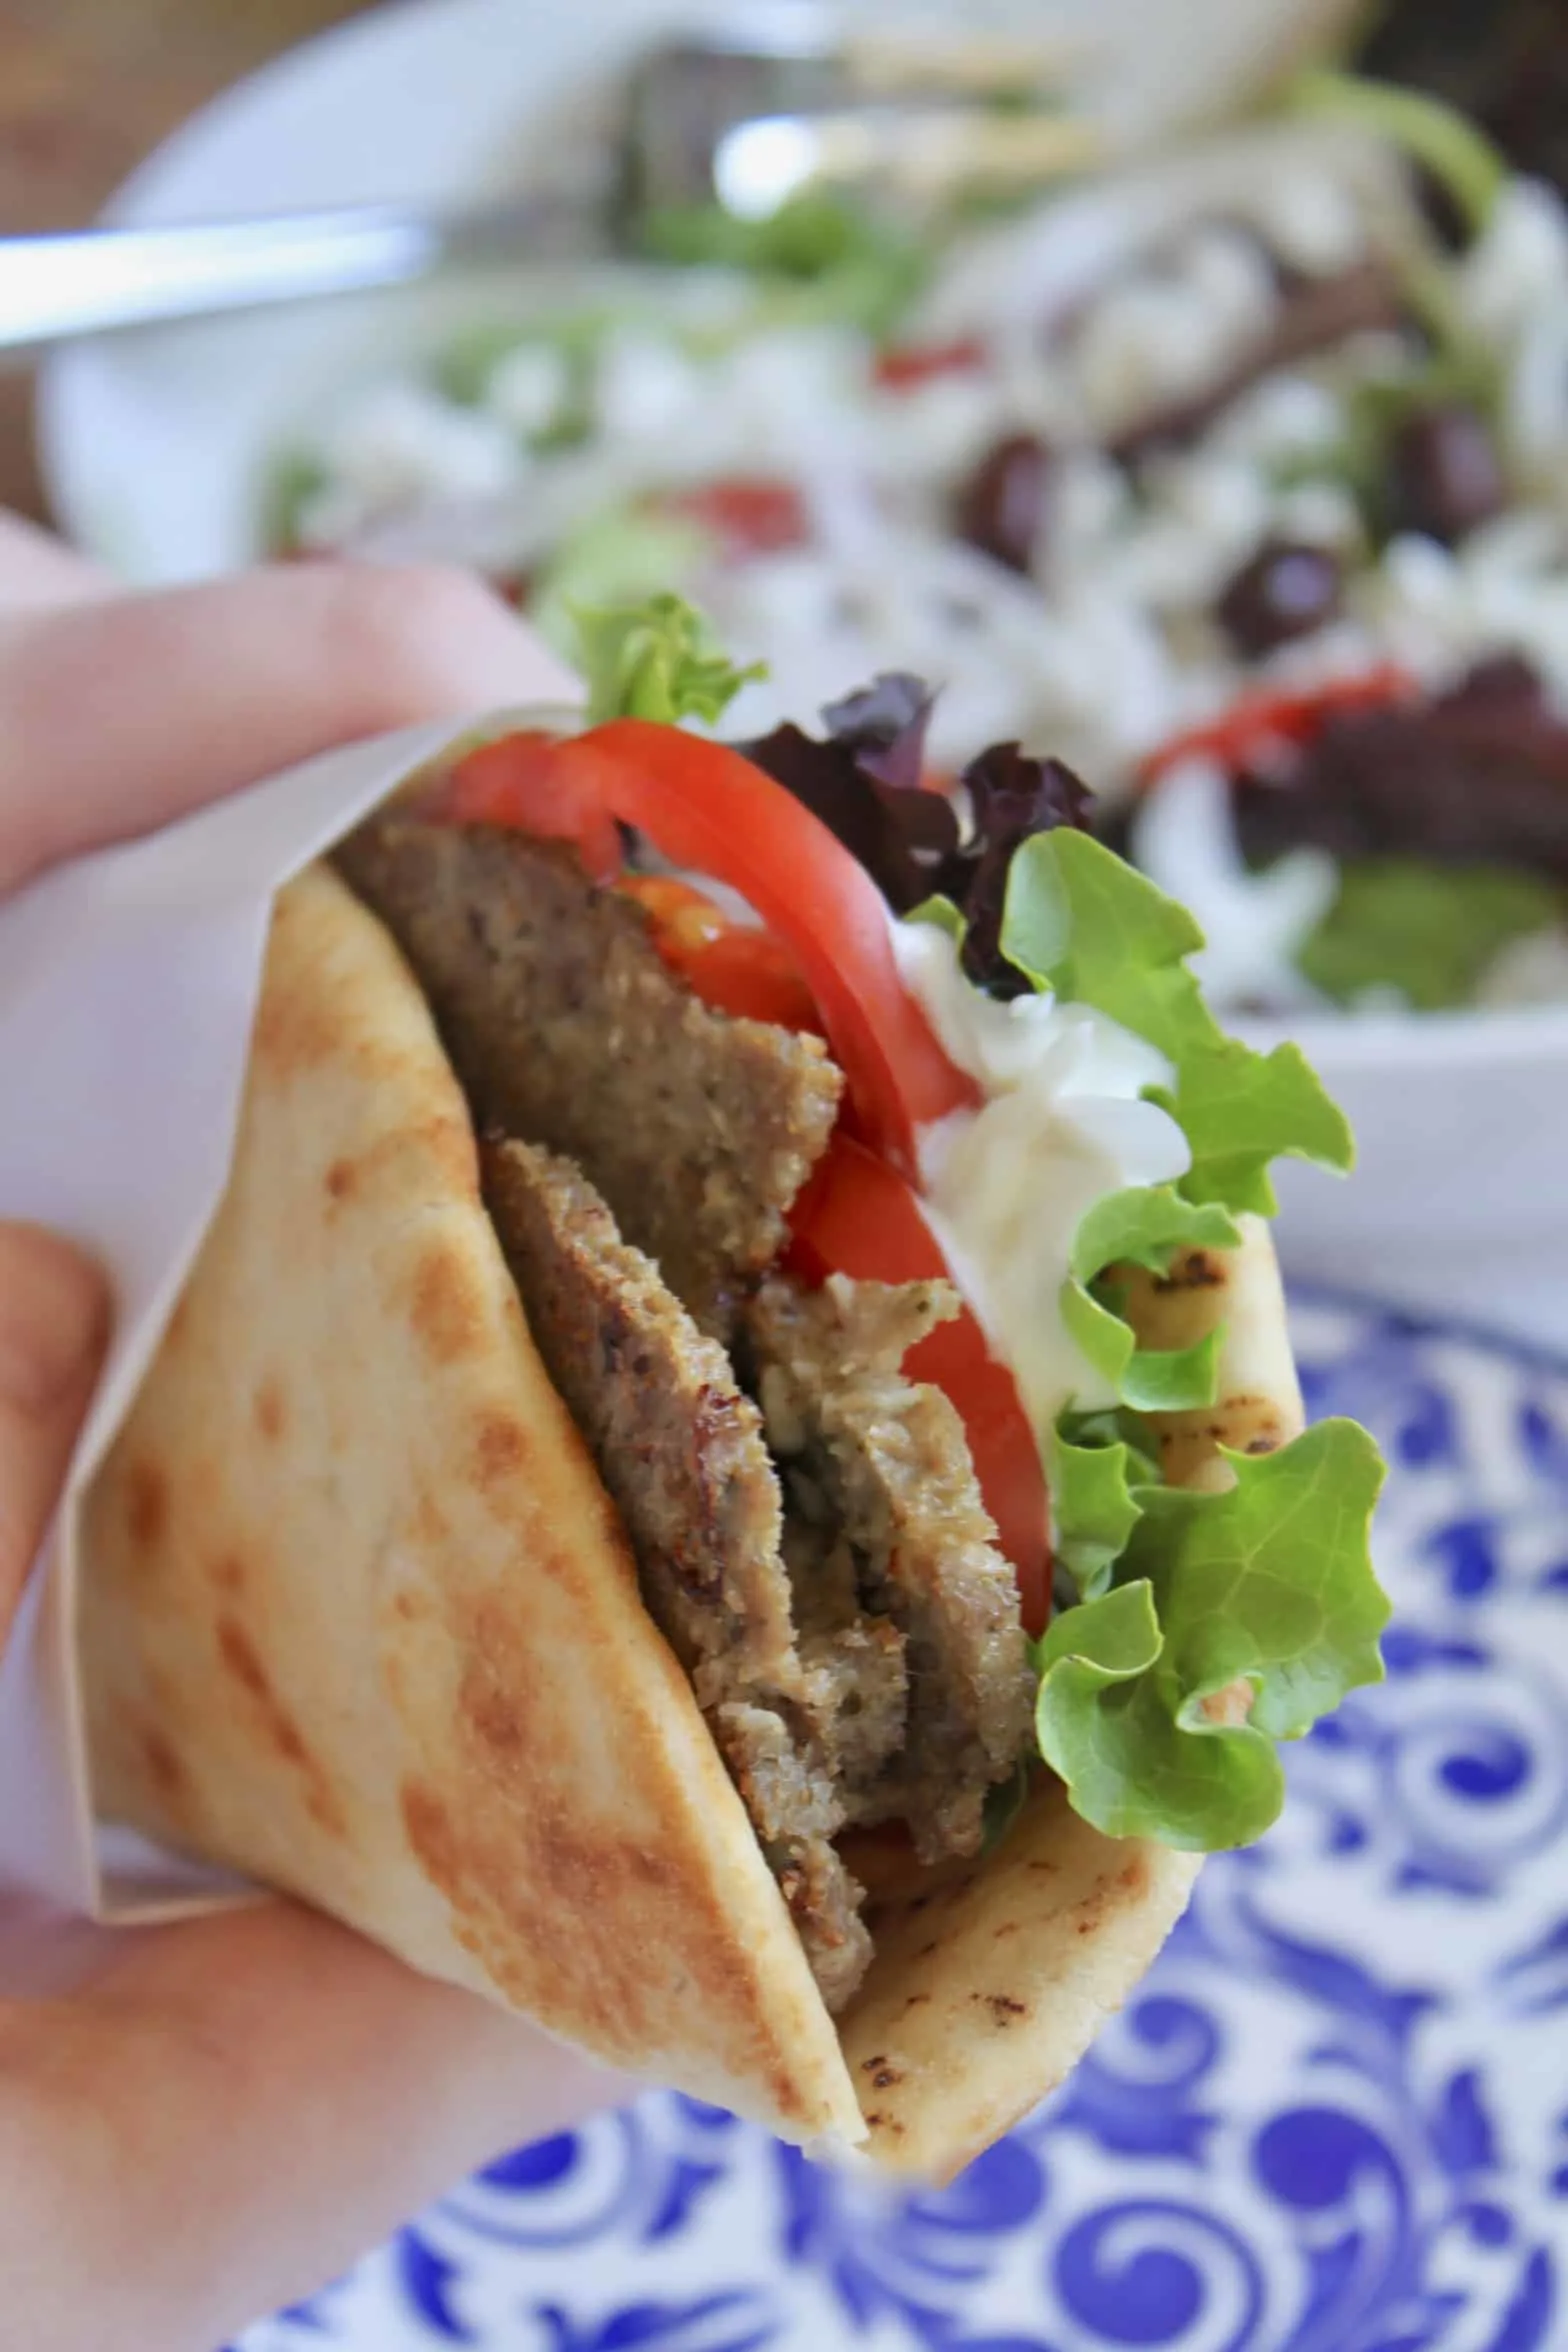 The opening of a greek gyro stuffed with tomatoes, lettuce, and onion.